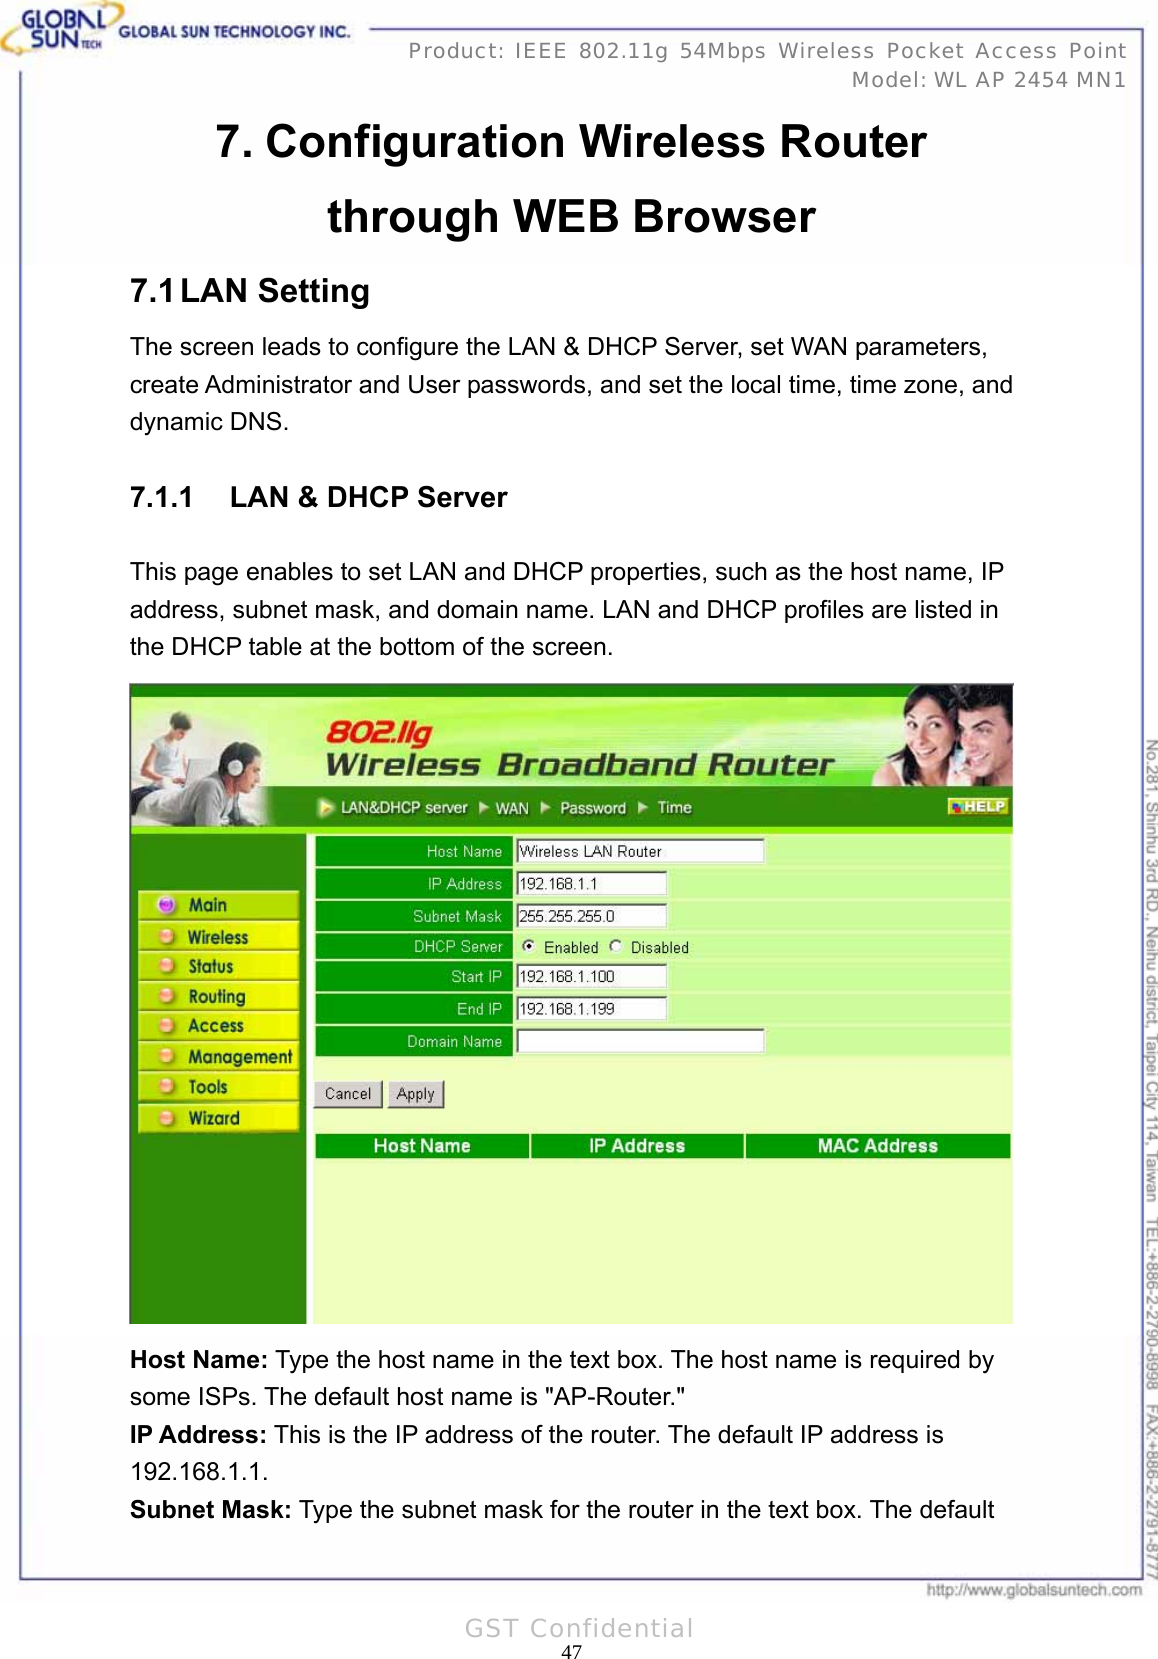   47Product: IEEE 802.11g 54Mbps Wireless Pocket Access Point Model: WL AP 2454 MN1GST Confidential 7. Configuration Wireless Router through WEB Browser 7.1 LAN  Setting The screen leads to configure the LAN &amp; DHCP Server, set WAN parameters, create Administrator and User passwords, and set the local time, time zone, and dynamic DNS. 7.1.1  LAN &amp; DHCP Server This page enables to set LAN and DHCP properties, such as the host name, IP address, subnet mask, and domain name. LAN and DHCP profiles are listed in the DHCP table at the bottom of the screen.  Host Name: Type the host name in the text box. The host name is required by some ISPs. The default host name is &quot;AP-Router.&quot; IP Address: This is the IP address of the router. The default IP address is 192.168.1.1. Subnet Mask: Type the subnet mask for the router in the text box. The default 